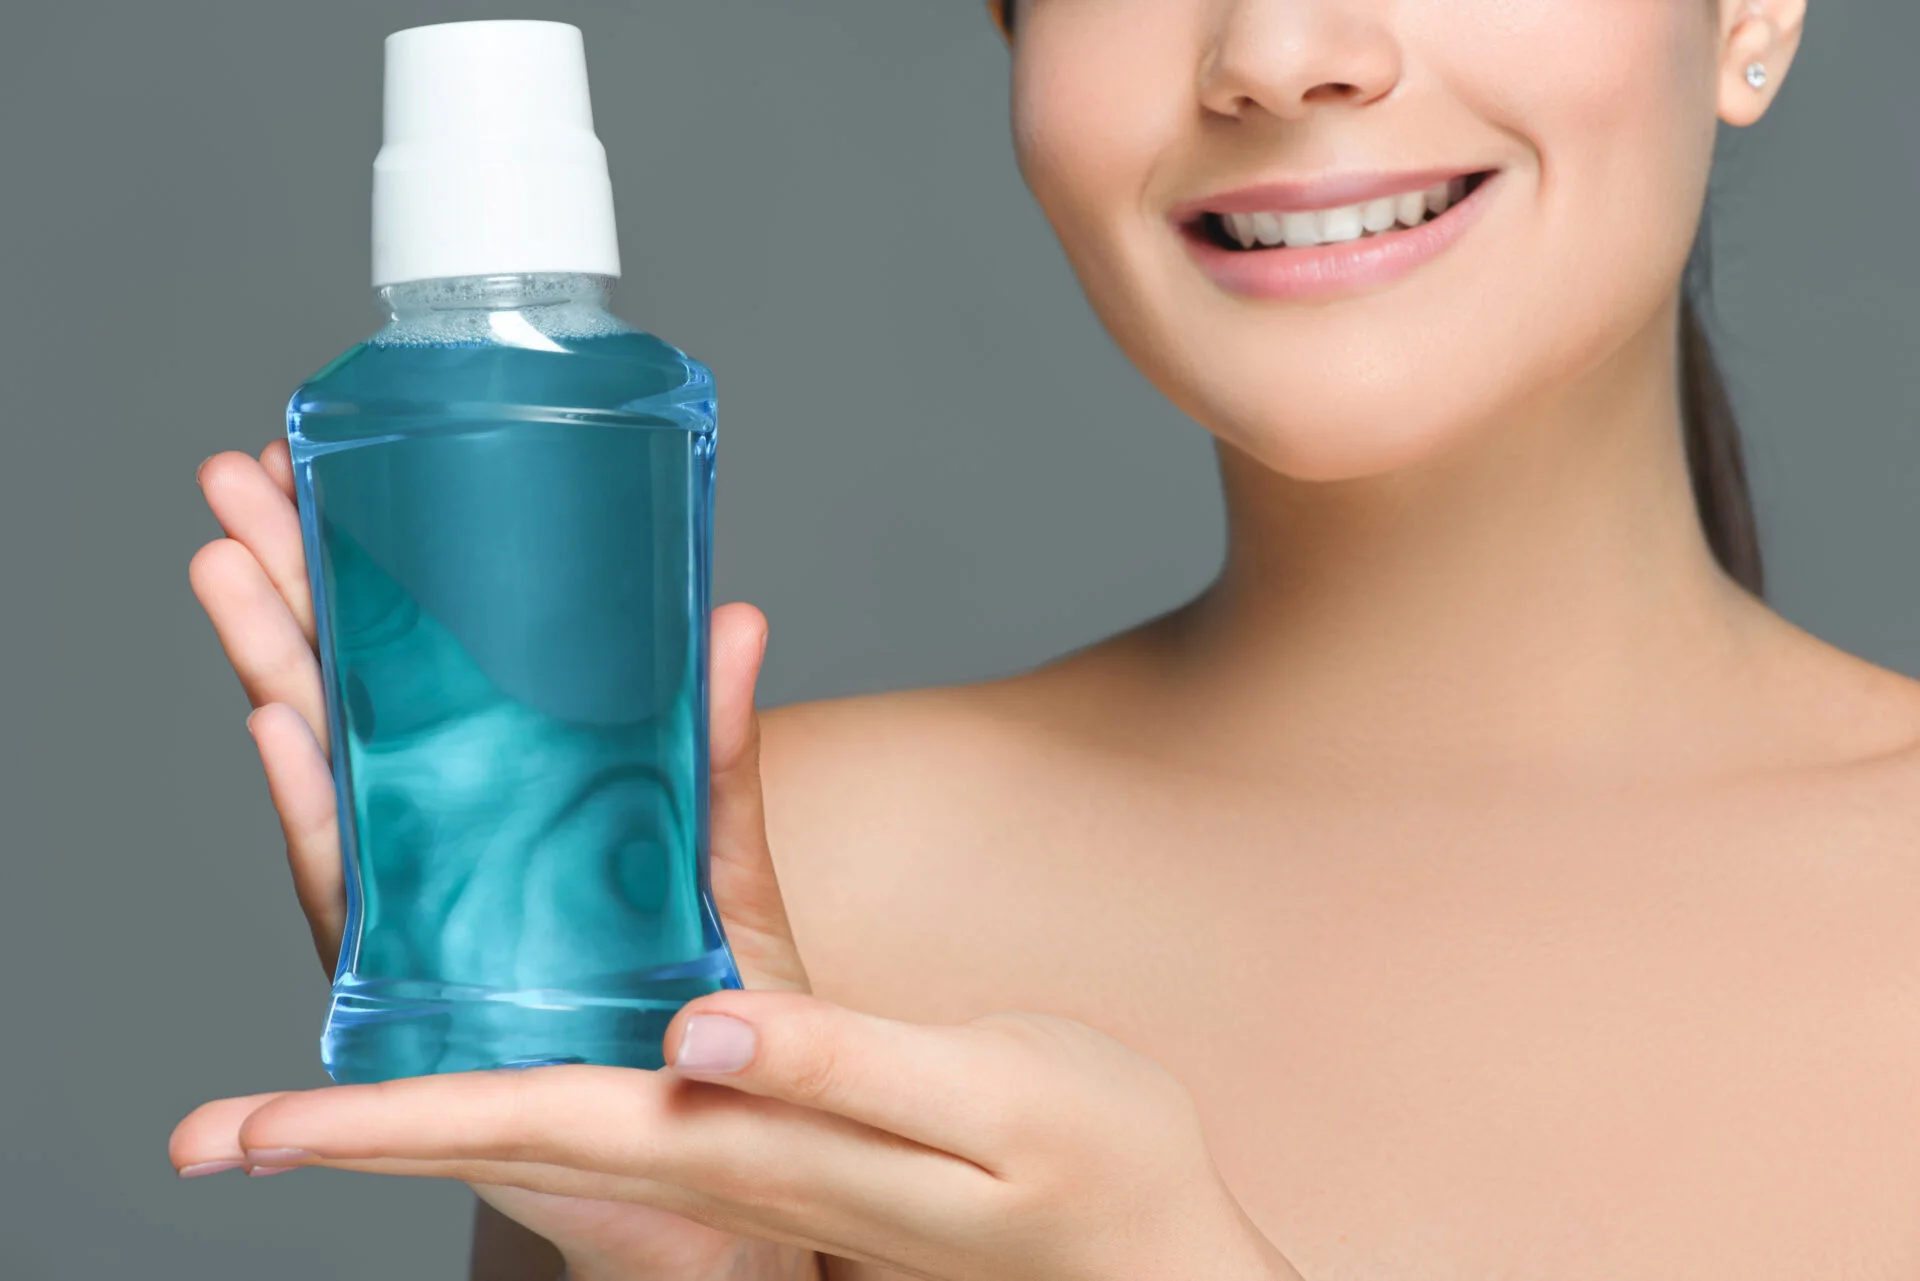 Woman holding up mouthwash with toxic ingredients